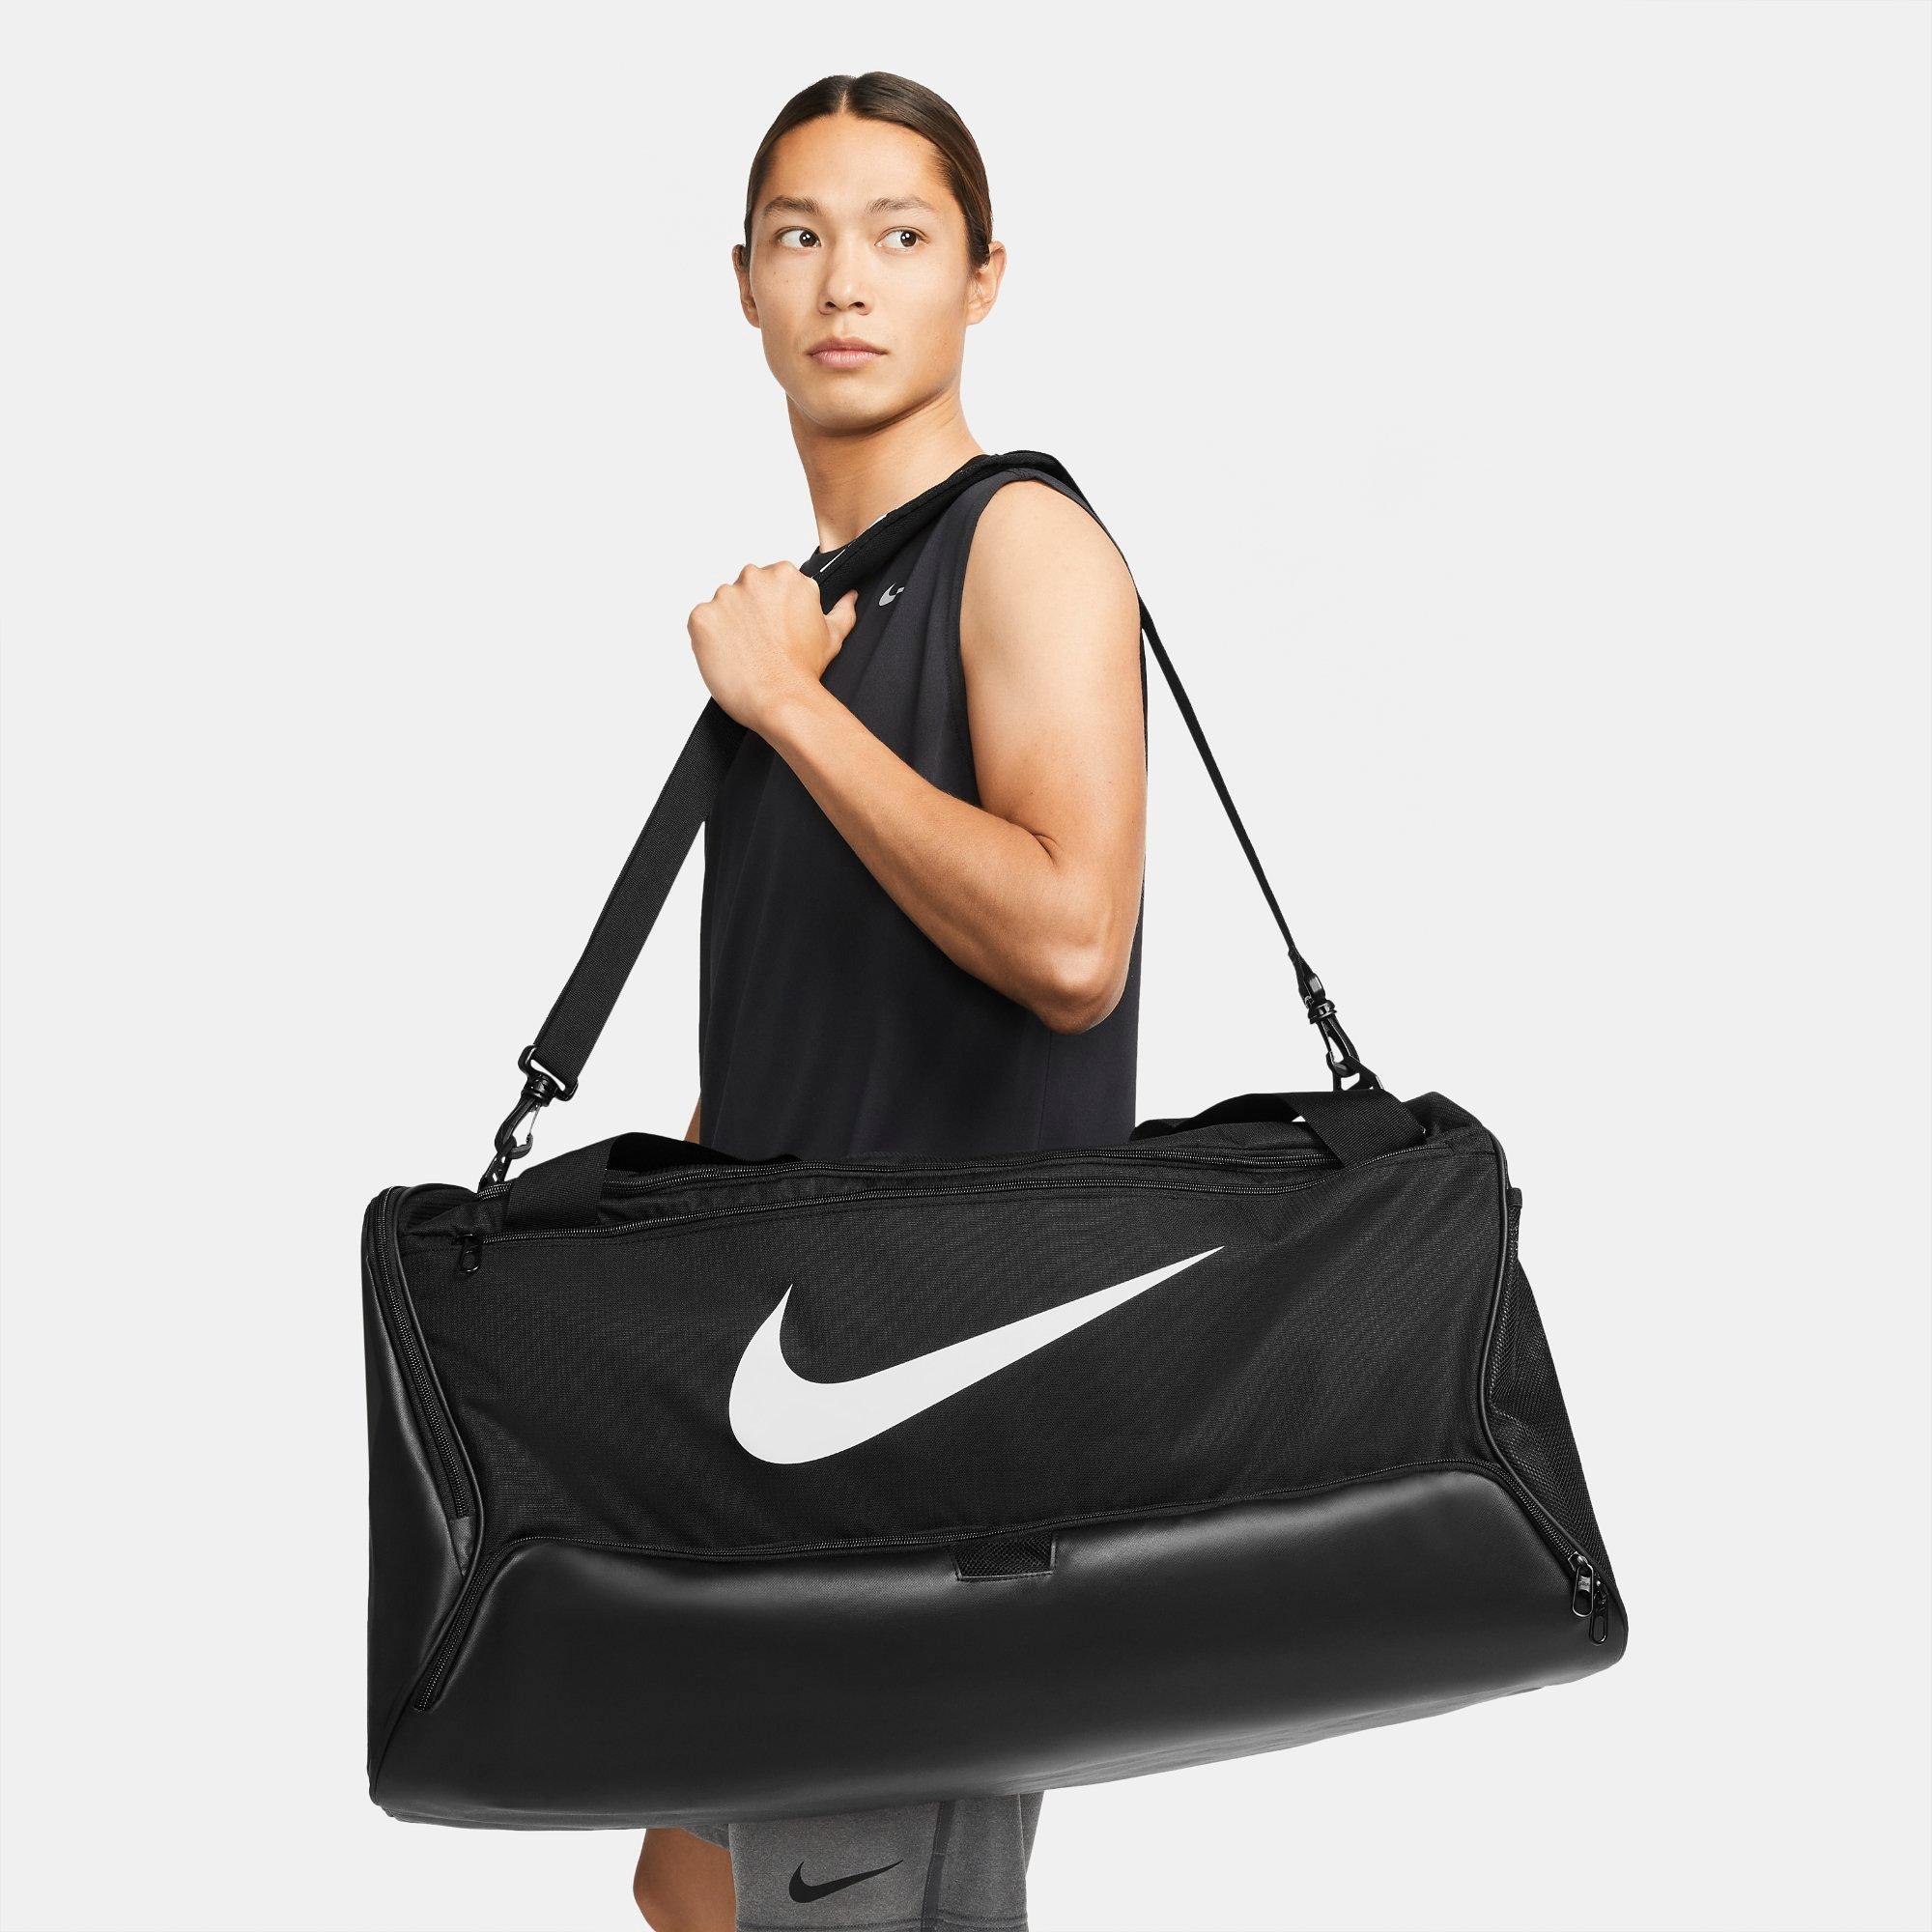 UNDEFEATED × NIKE KOBE DUFFLE BAG バッグ - リュック/バックパック